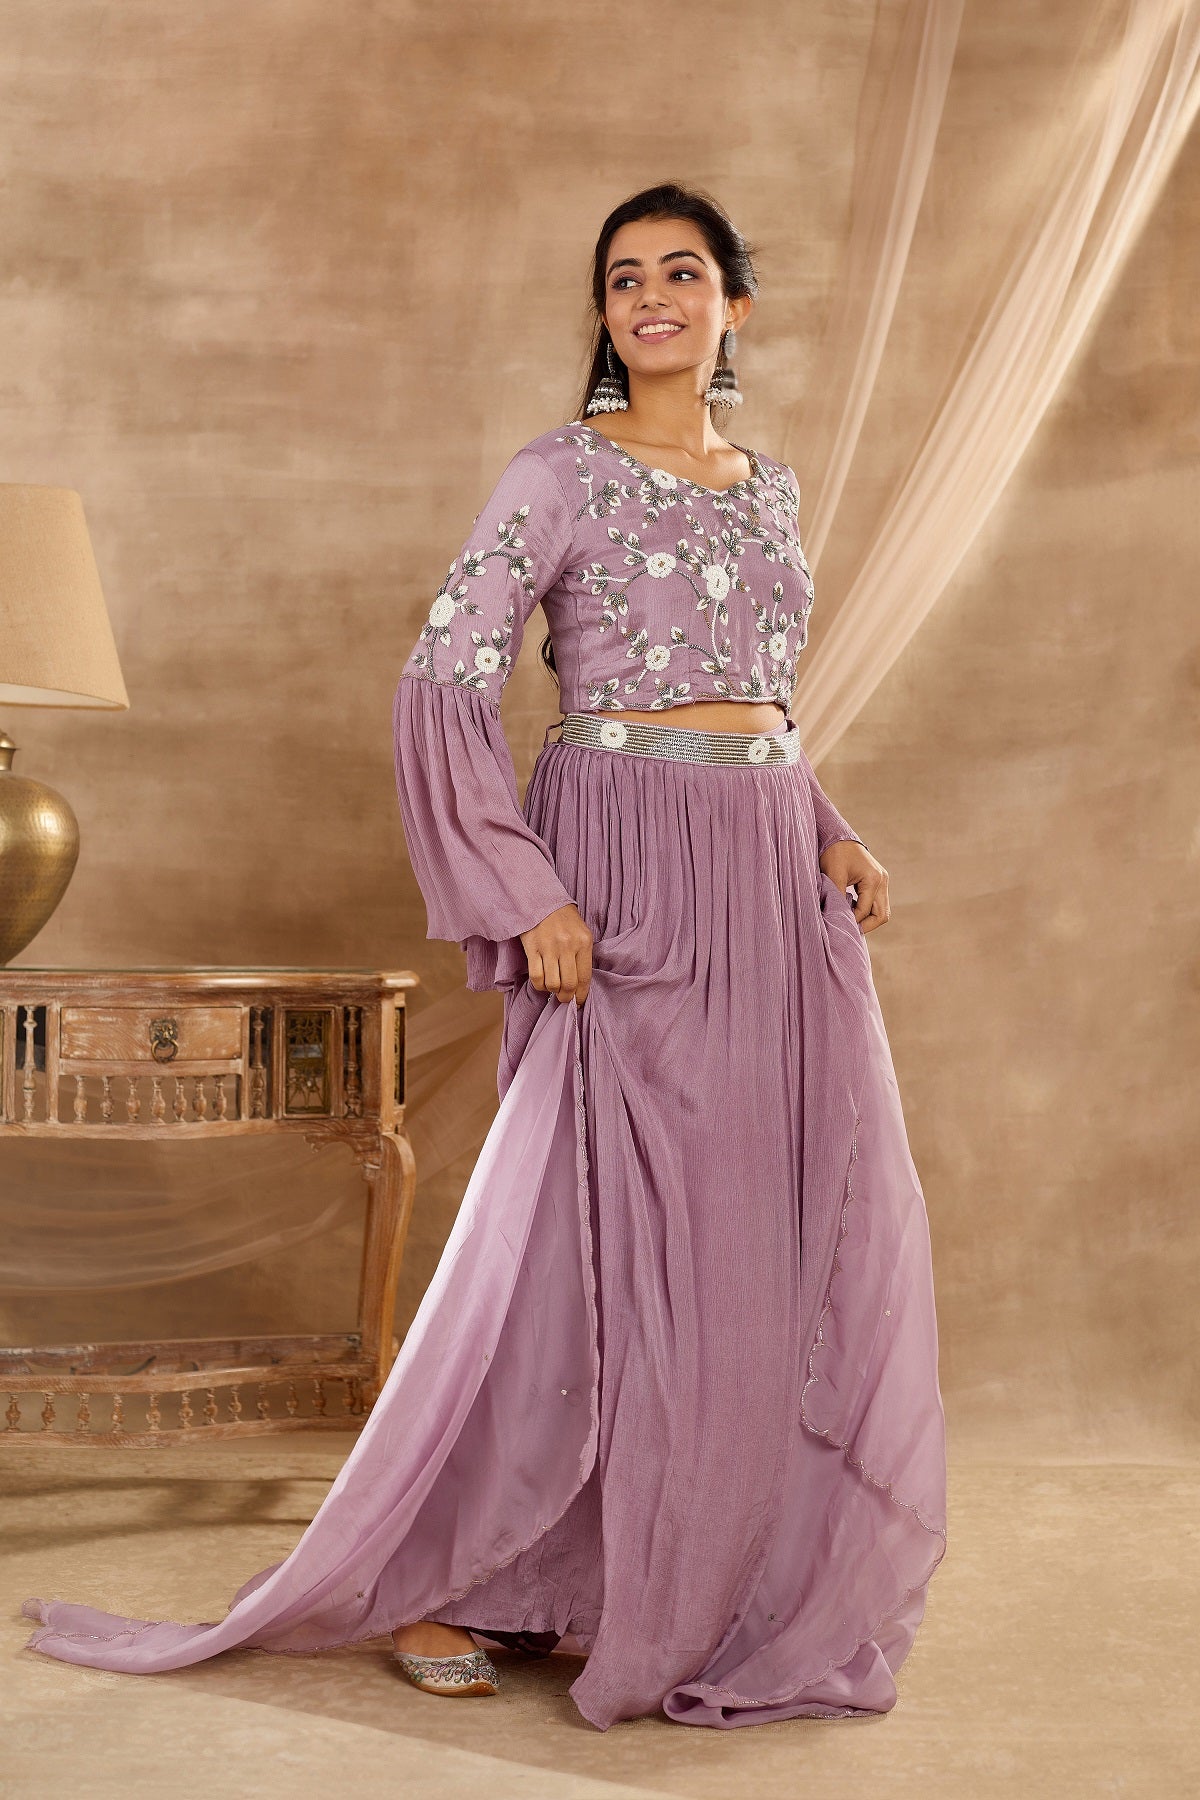 fcity.in - Designer Heavy Stitched Lehenga Choli With Handwork Bell Sleeves  /